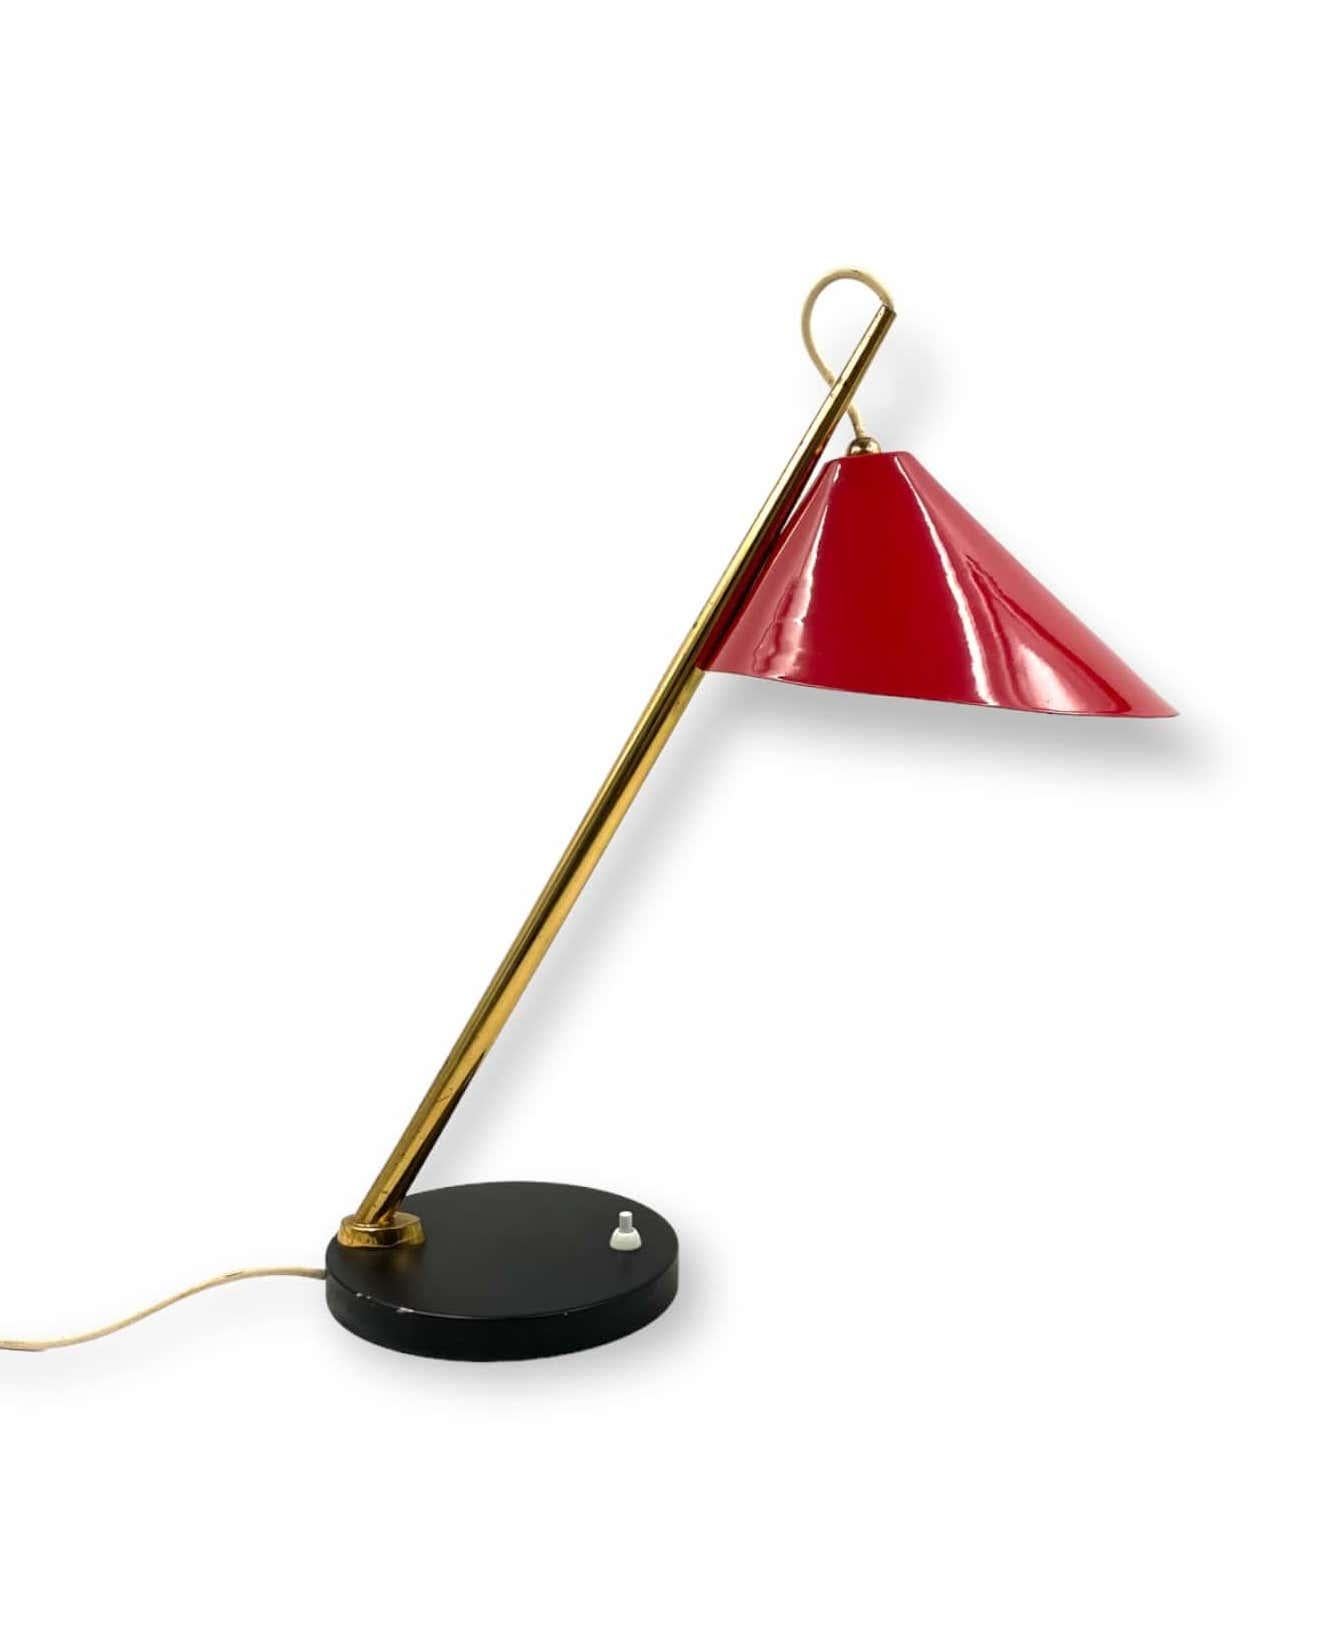 Aluminum Midcentury Red Table Lamp, Lumen, Italy, 1960s For Sale